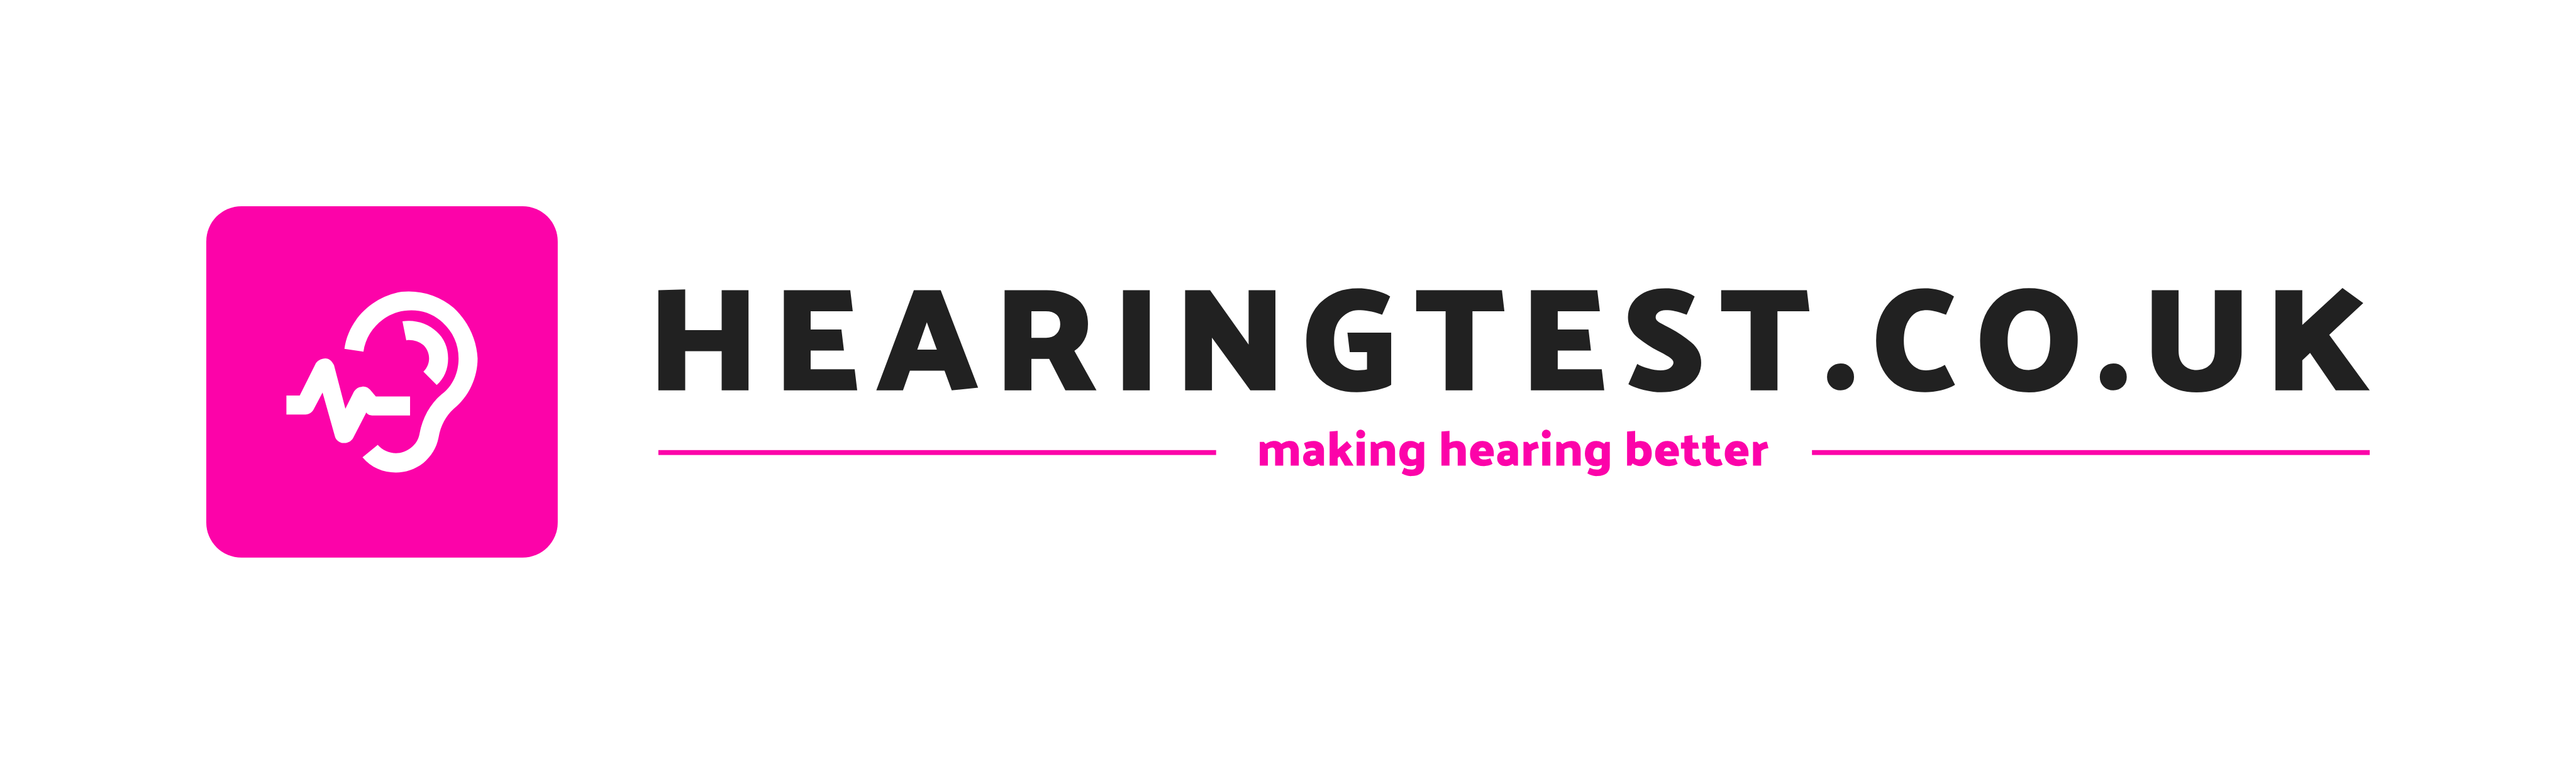 Free Hearing Test for Adults | Hearingtest.co.uk